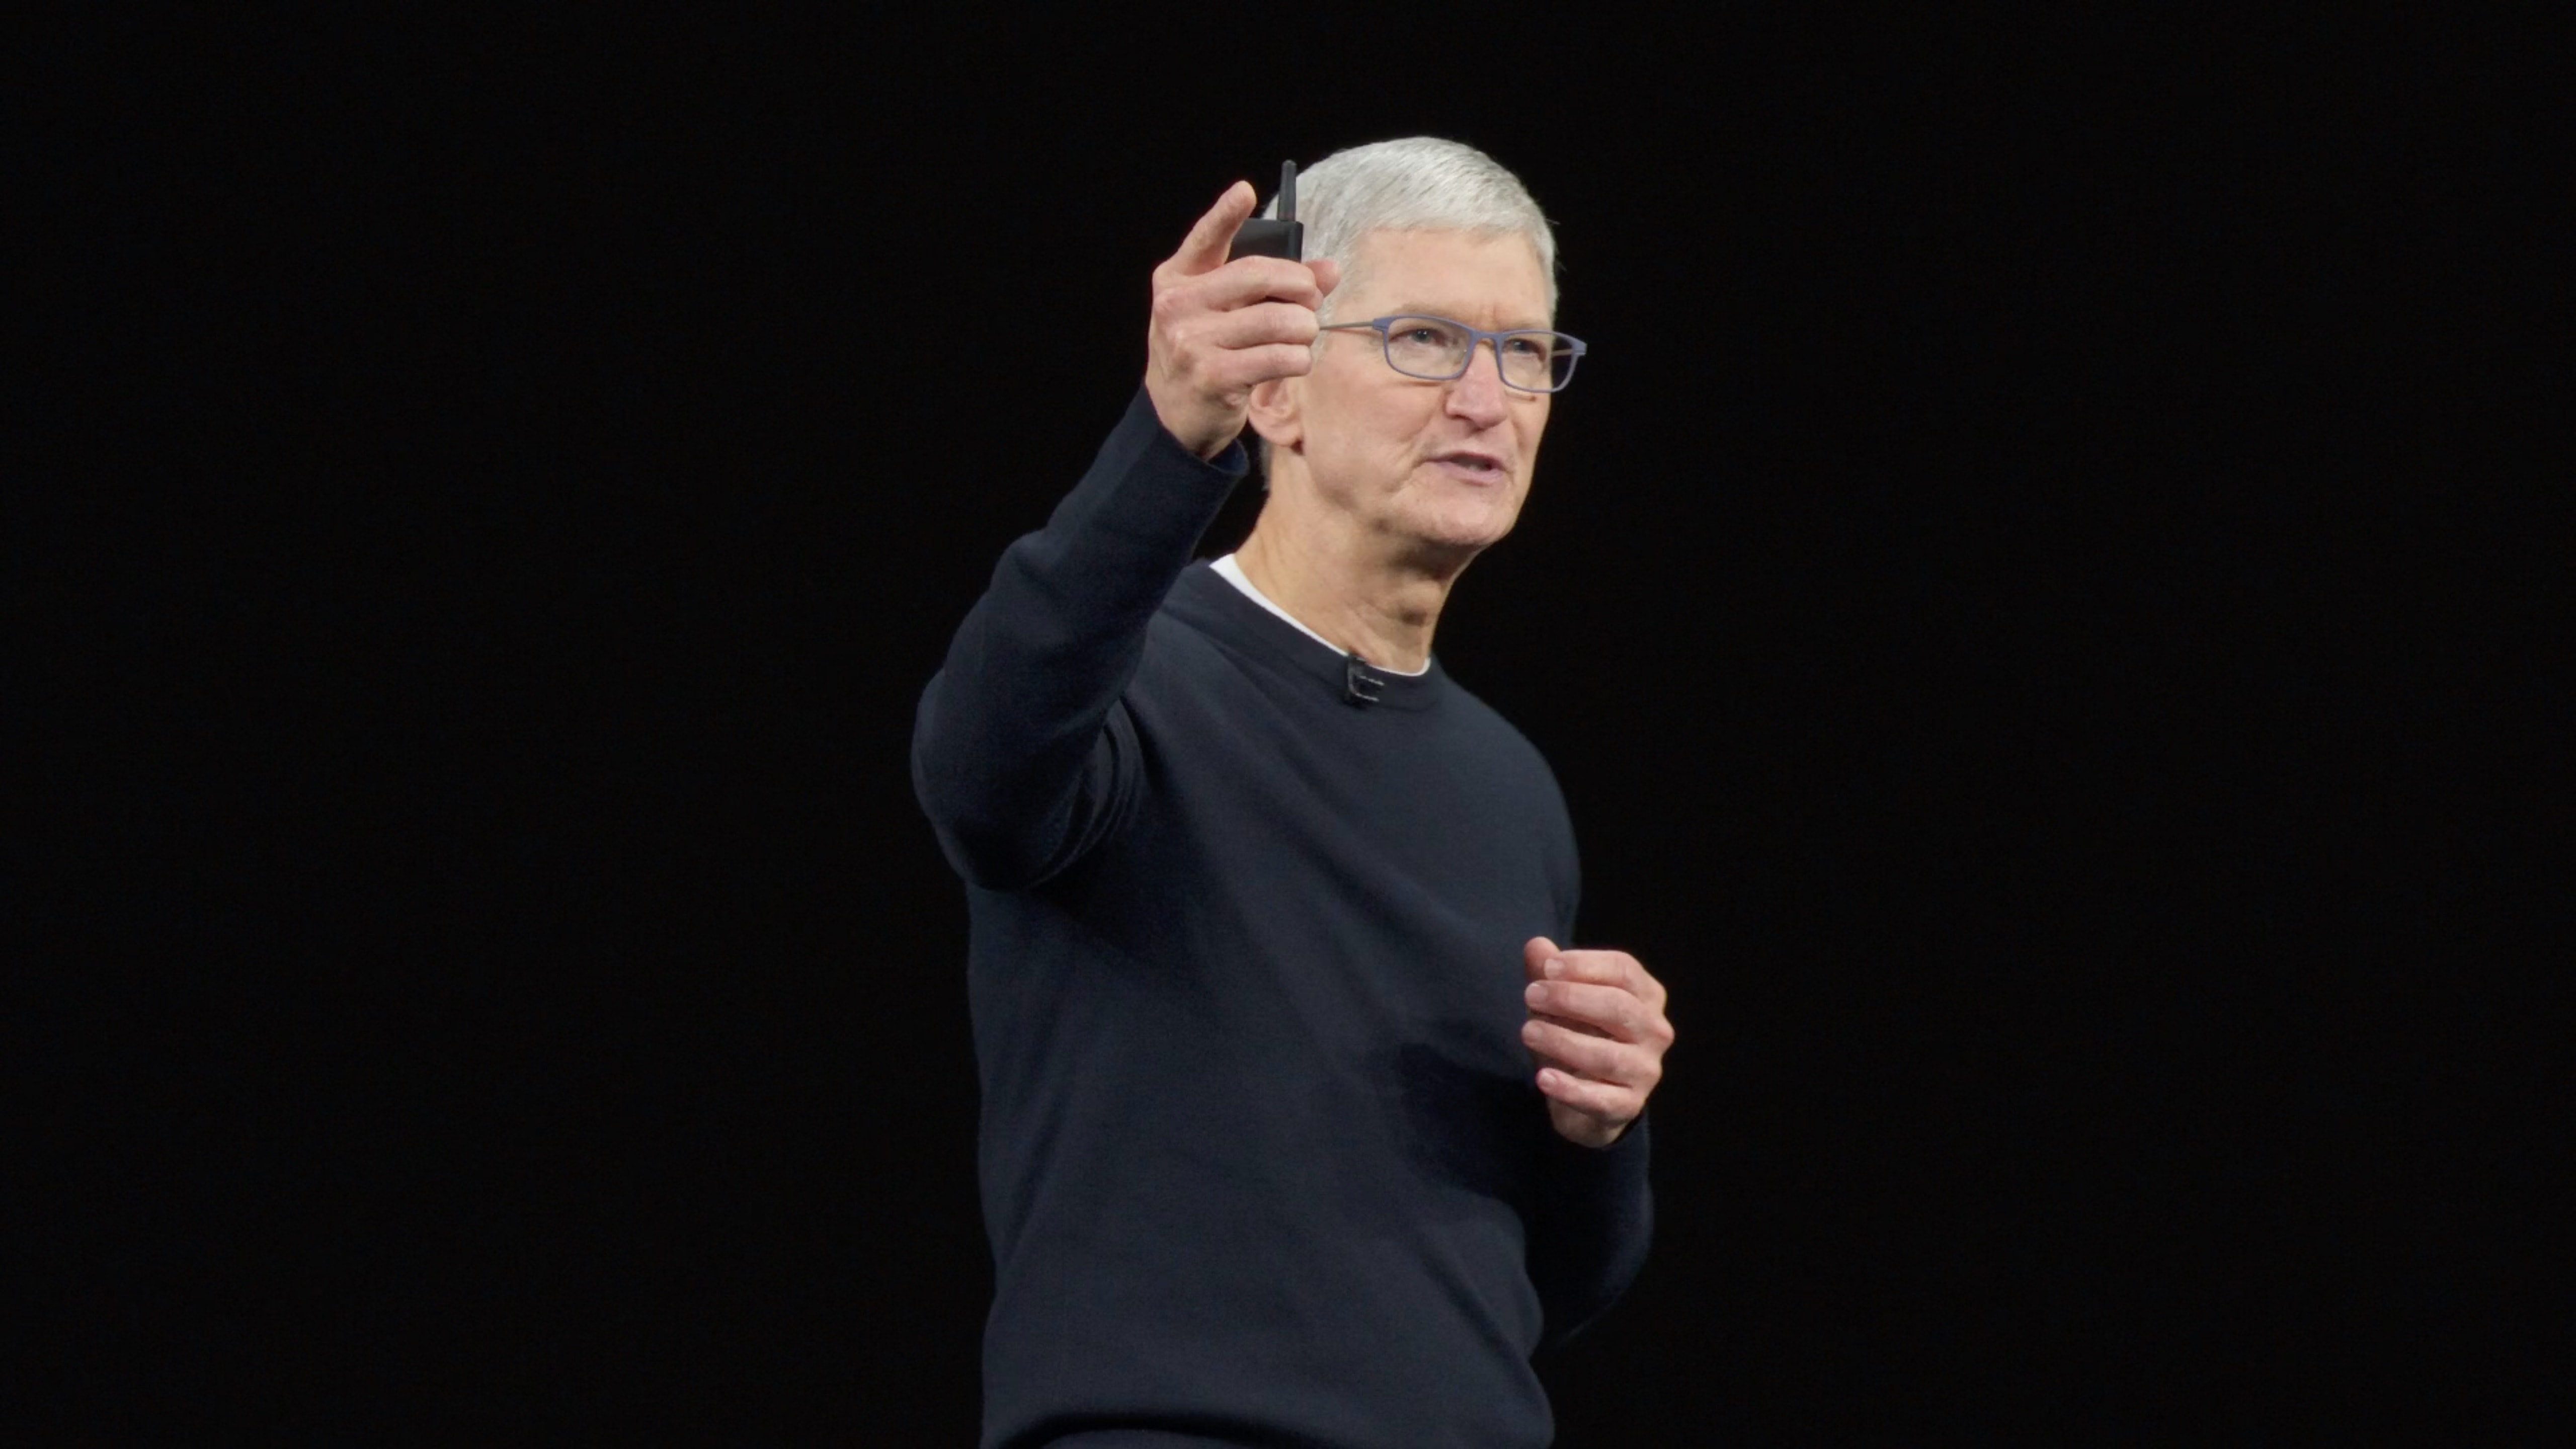 Tim Cook delivers the goods at Apple's iPhone 11 event.